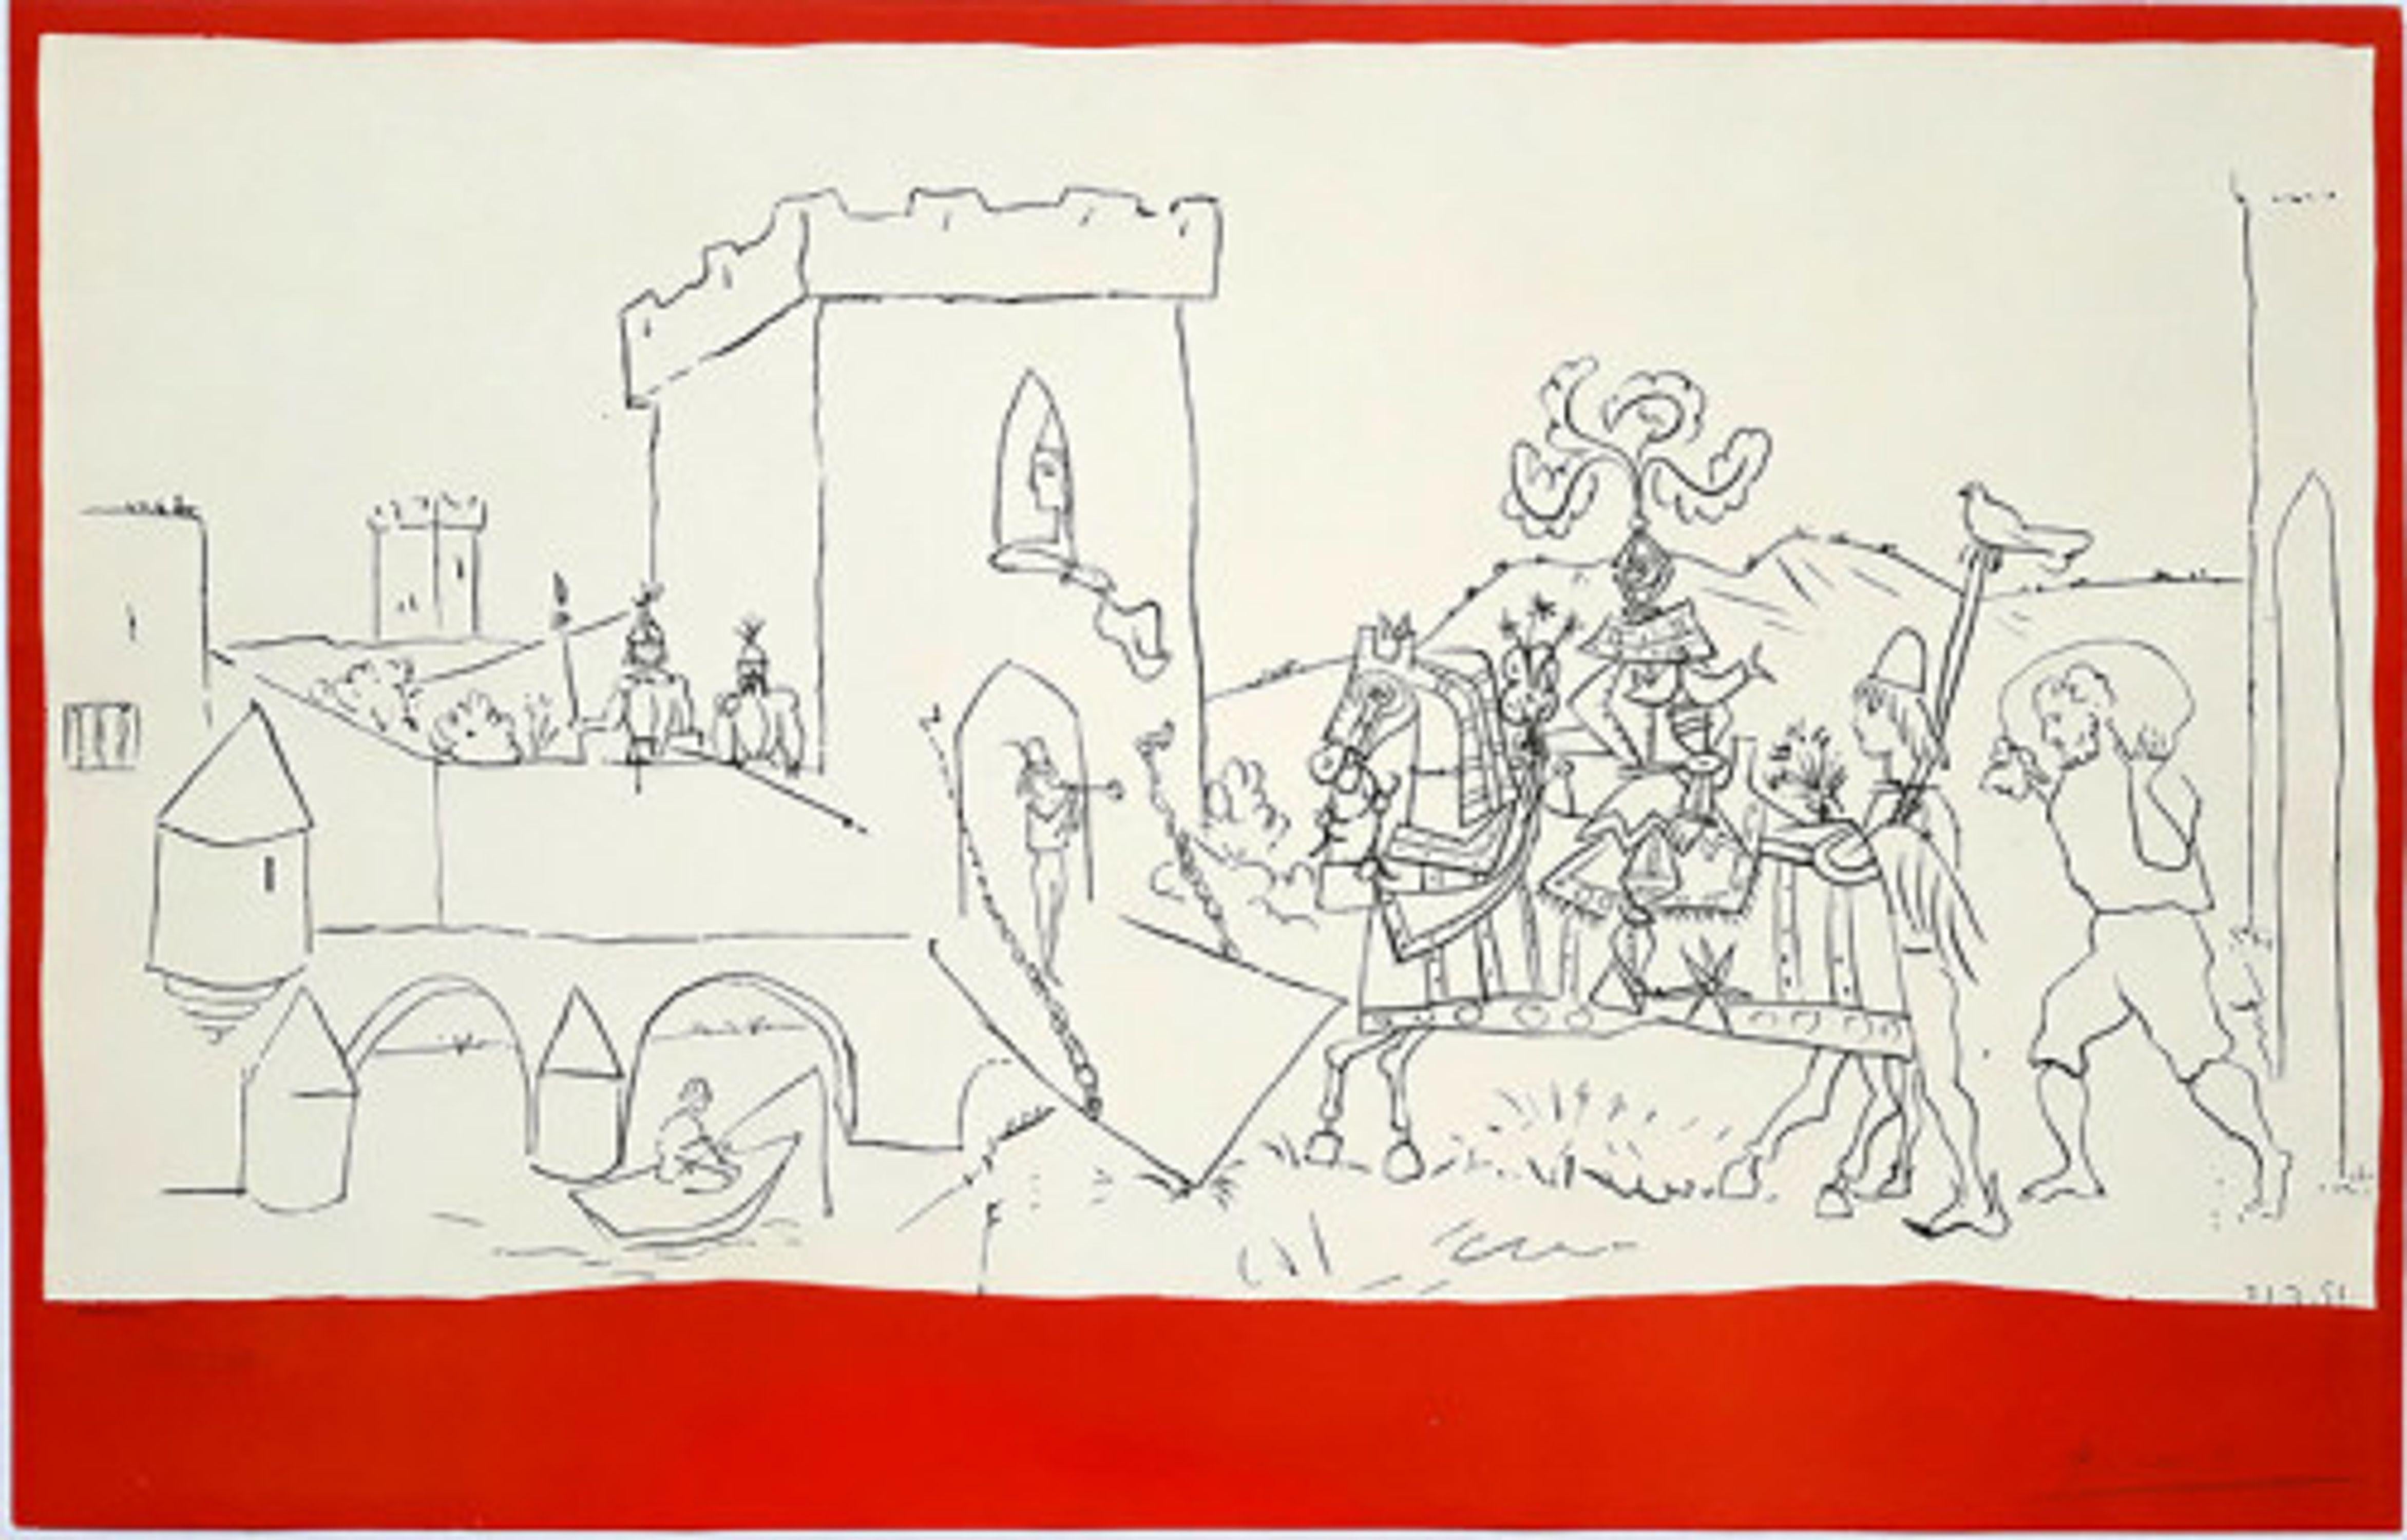 L'Arrivée du Chevalier (The Arrival of the Knight) - Print by Pablo Picasso